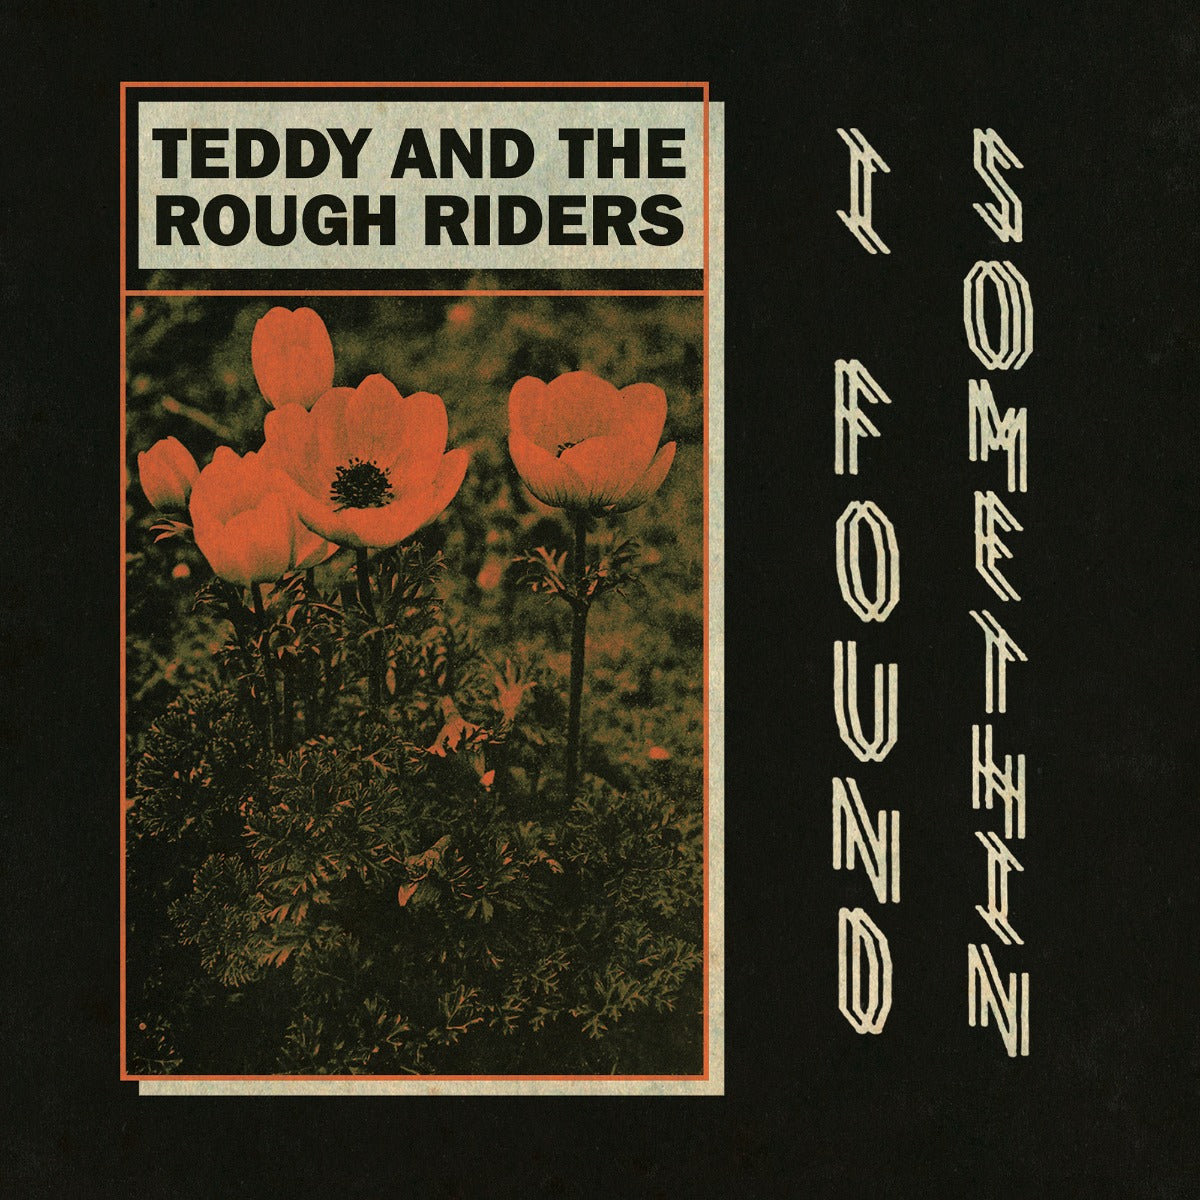 Teddy and the Rough Riders - Teddy and the Rough Riders - "I Found Somethin'" b/w "Neon Cowboy" twelve inch vinyl cover